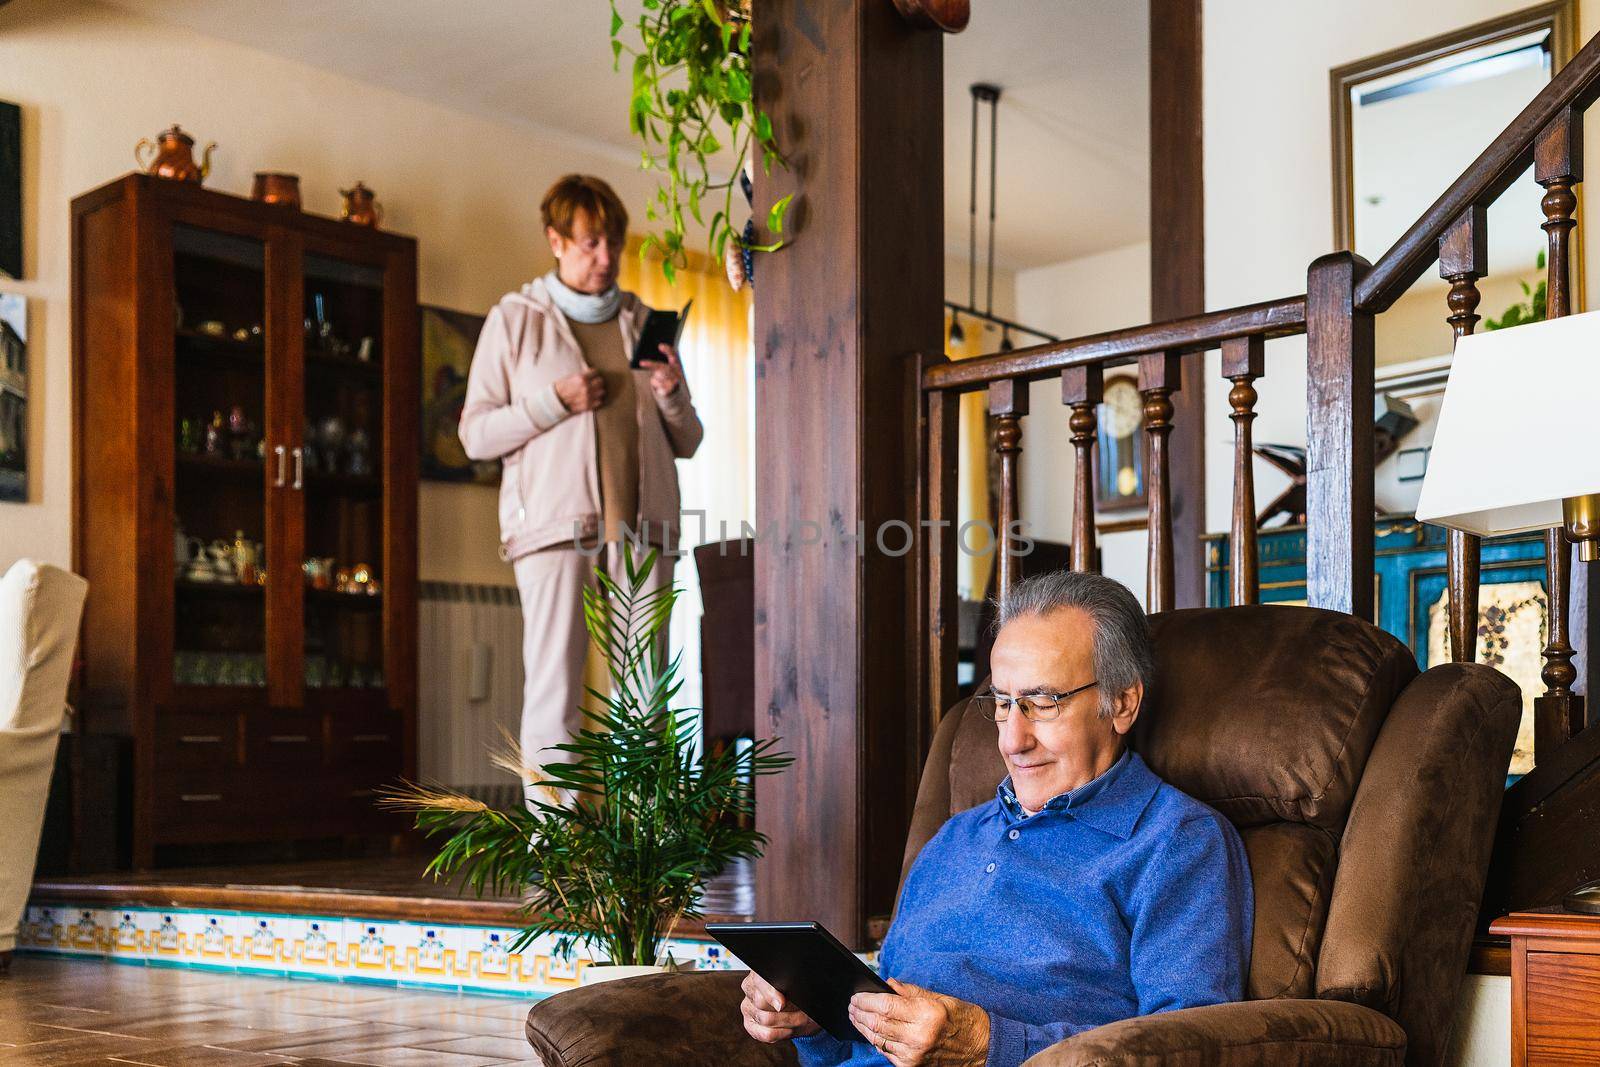 Grandfather using tablet in a living room with natural light. He wear a blue sweater and glasses. Its in his house, size view with natural light